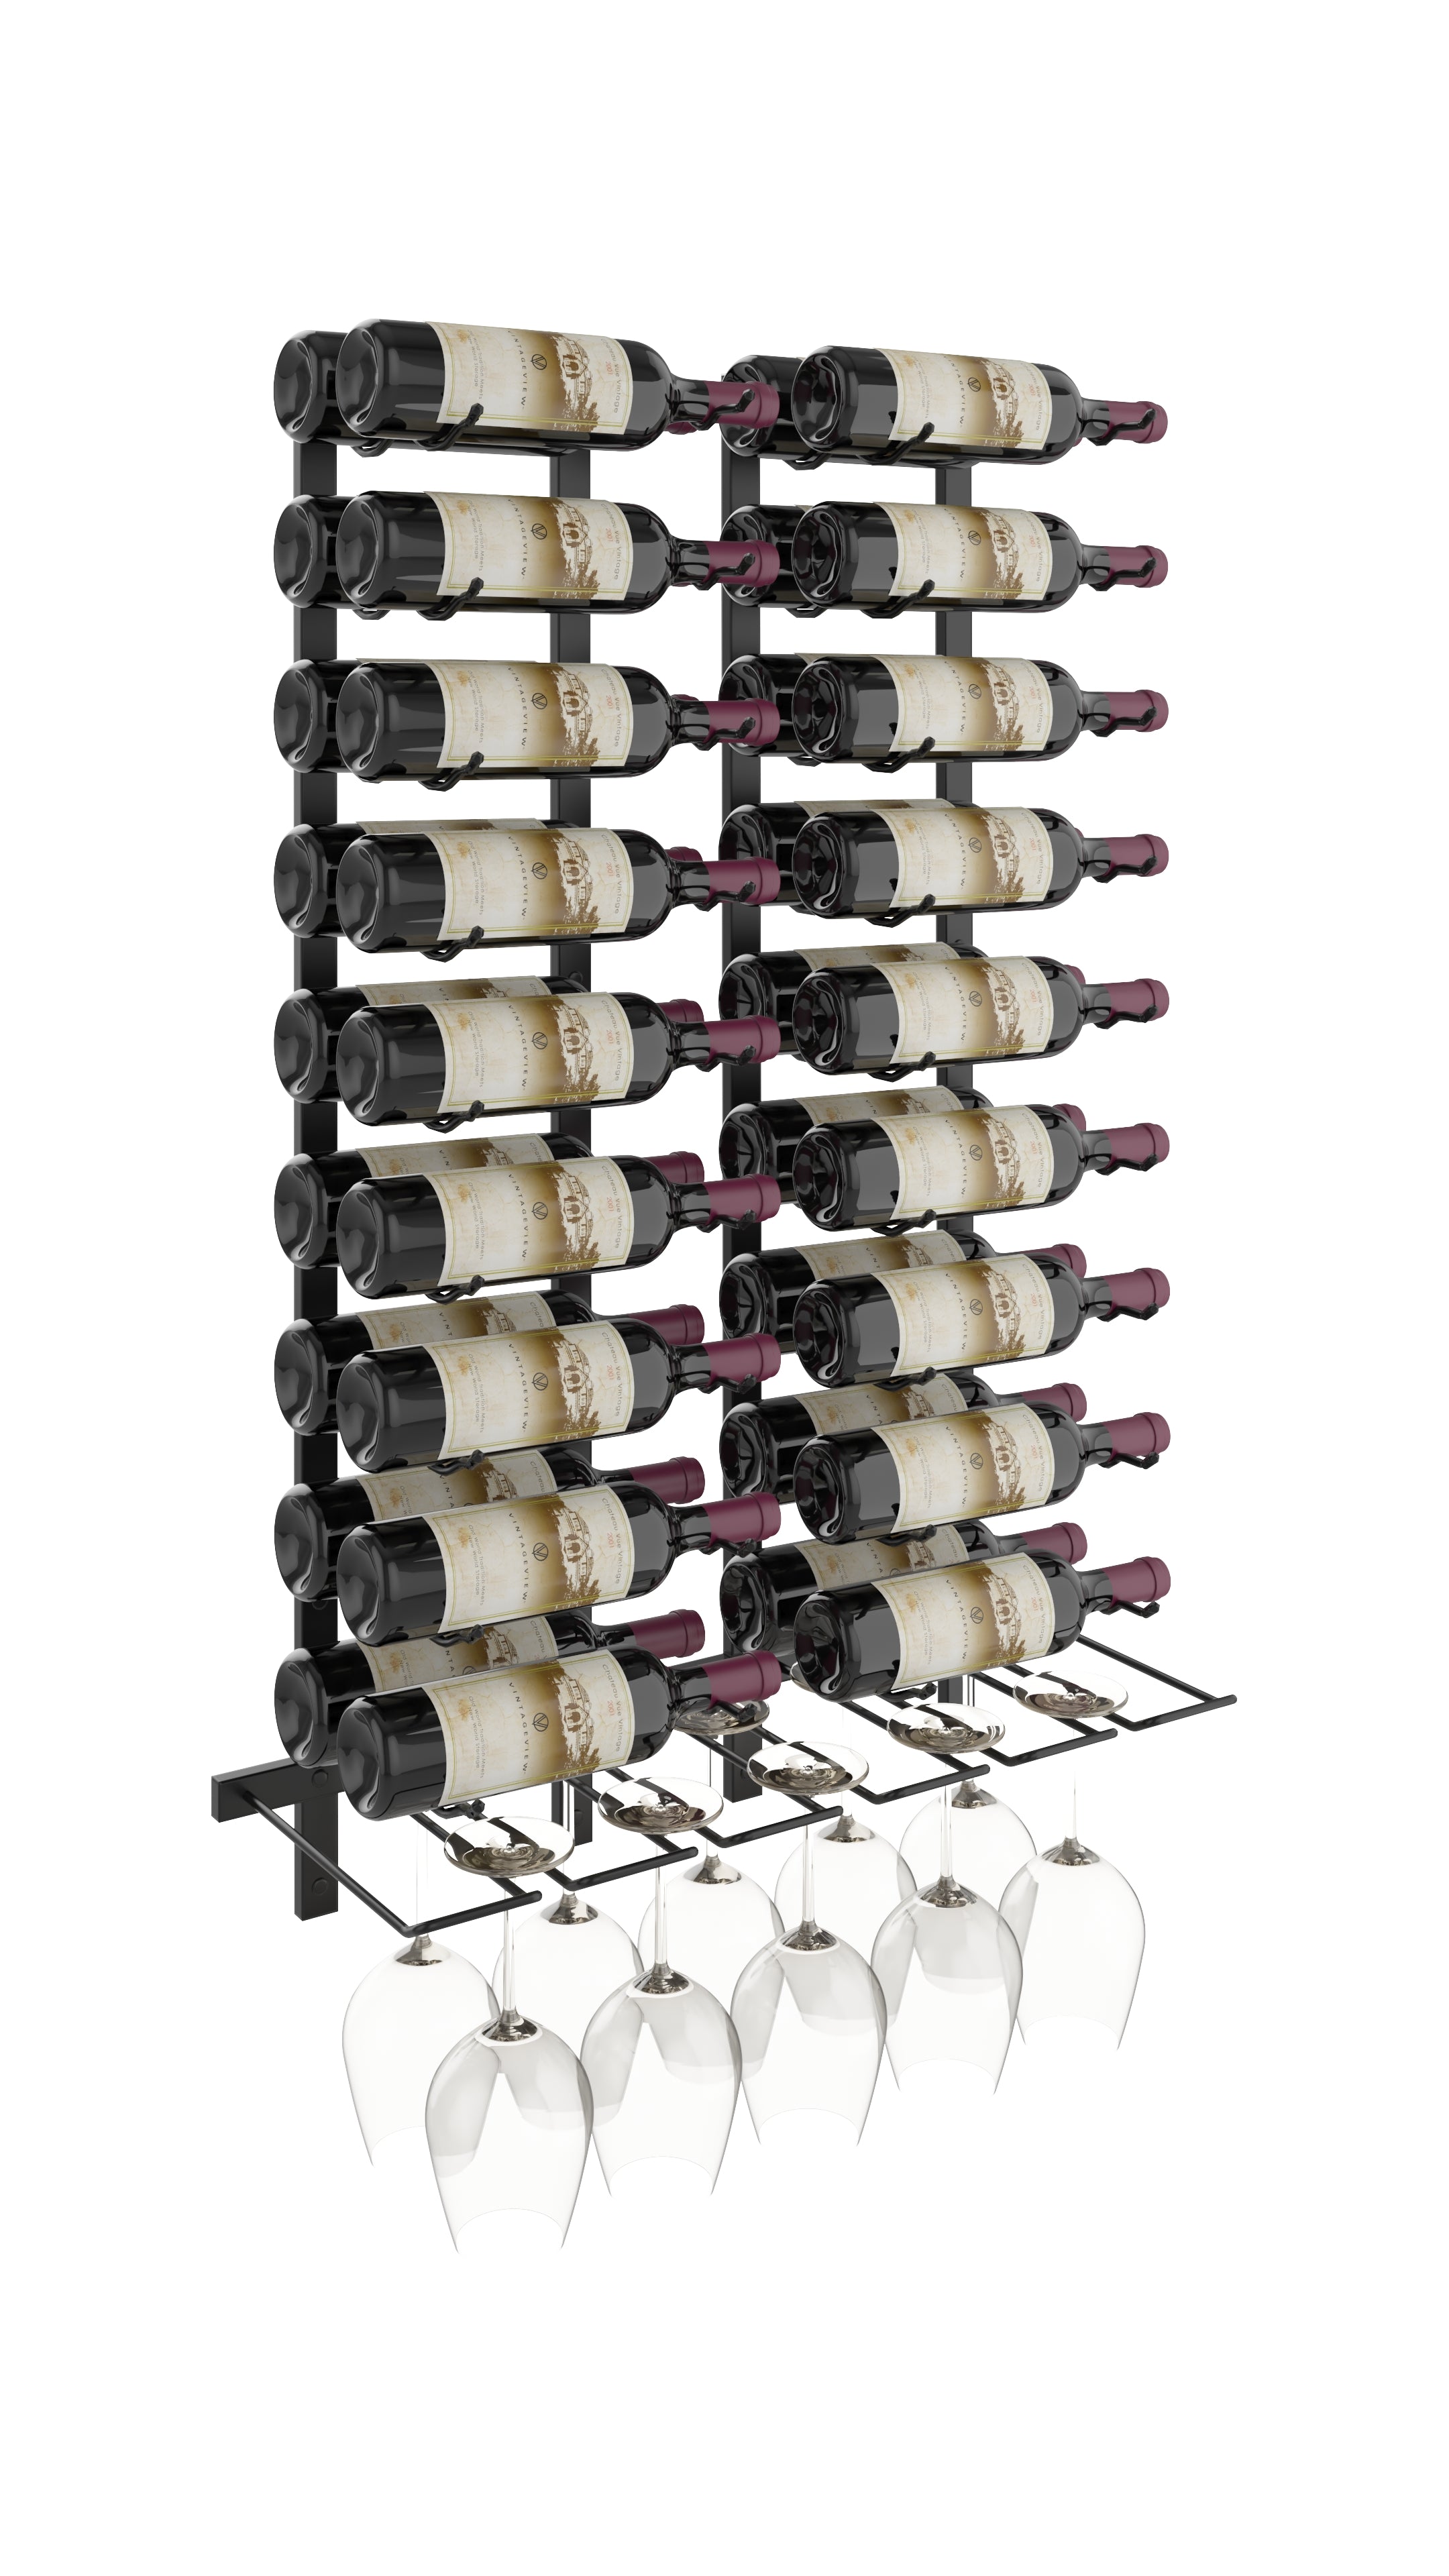 Double-depth-home-bar-wine-rack-and-wine-glass-holder